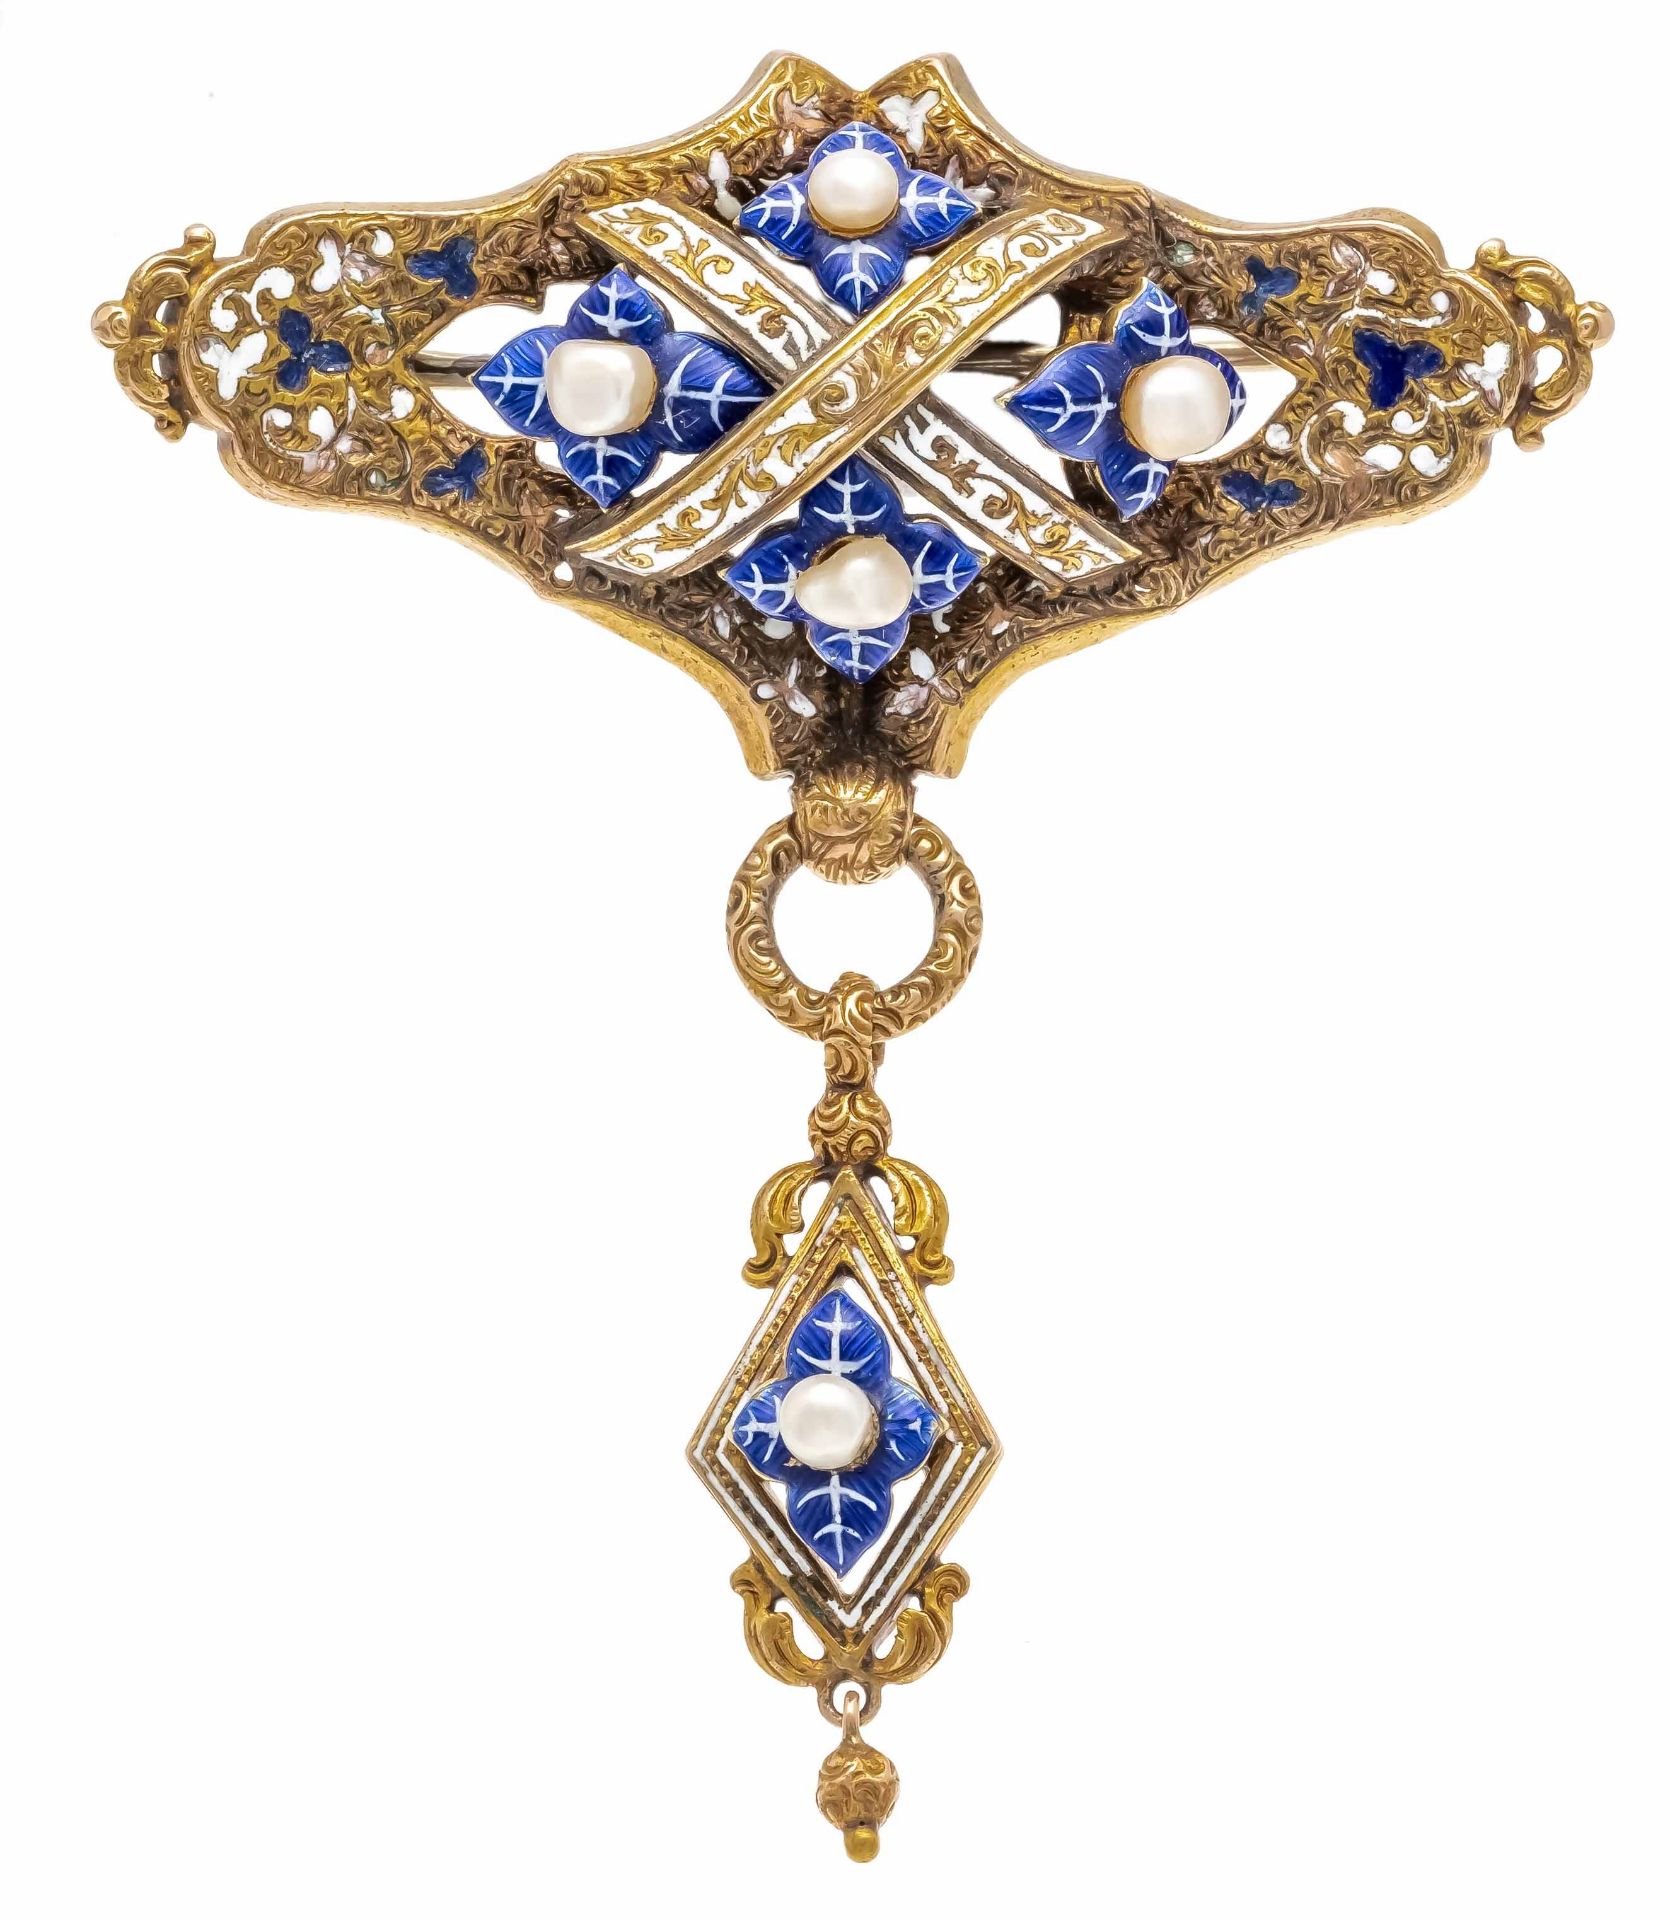 Enamel brooch c. 1850 GG 585/000 unstamped, tested, finely chased floral tendrils and diamond-shaped